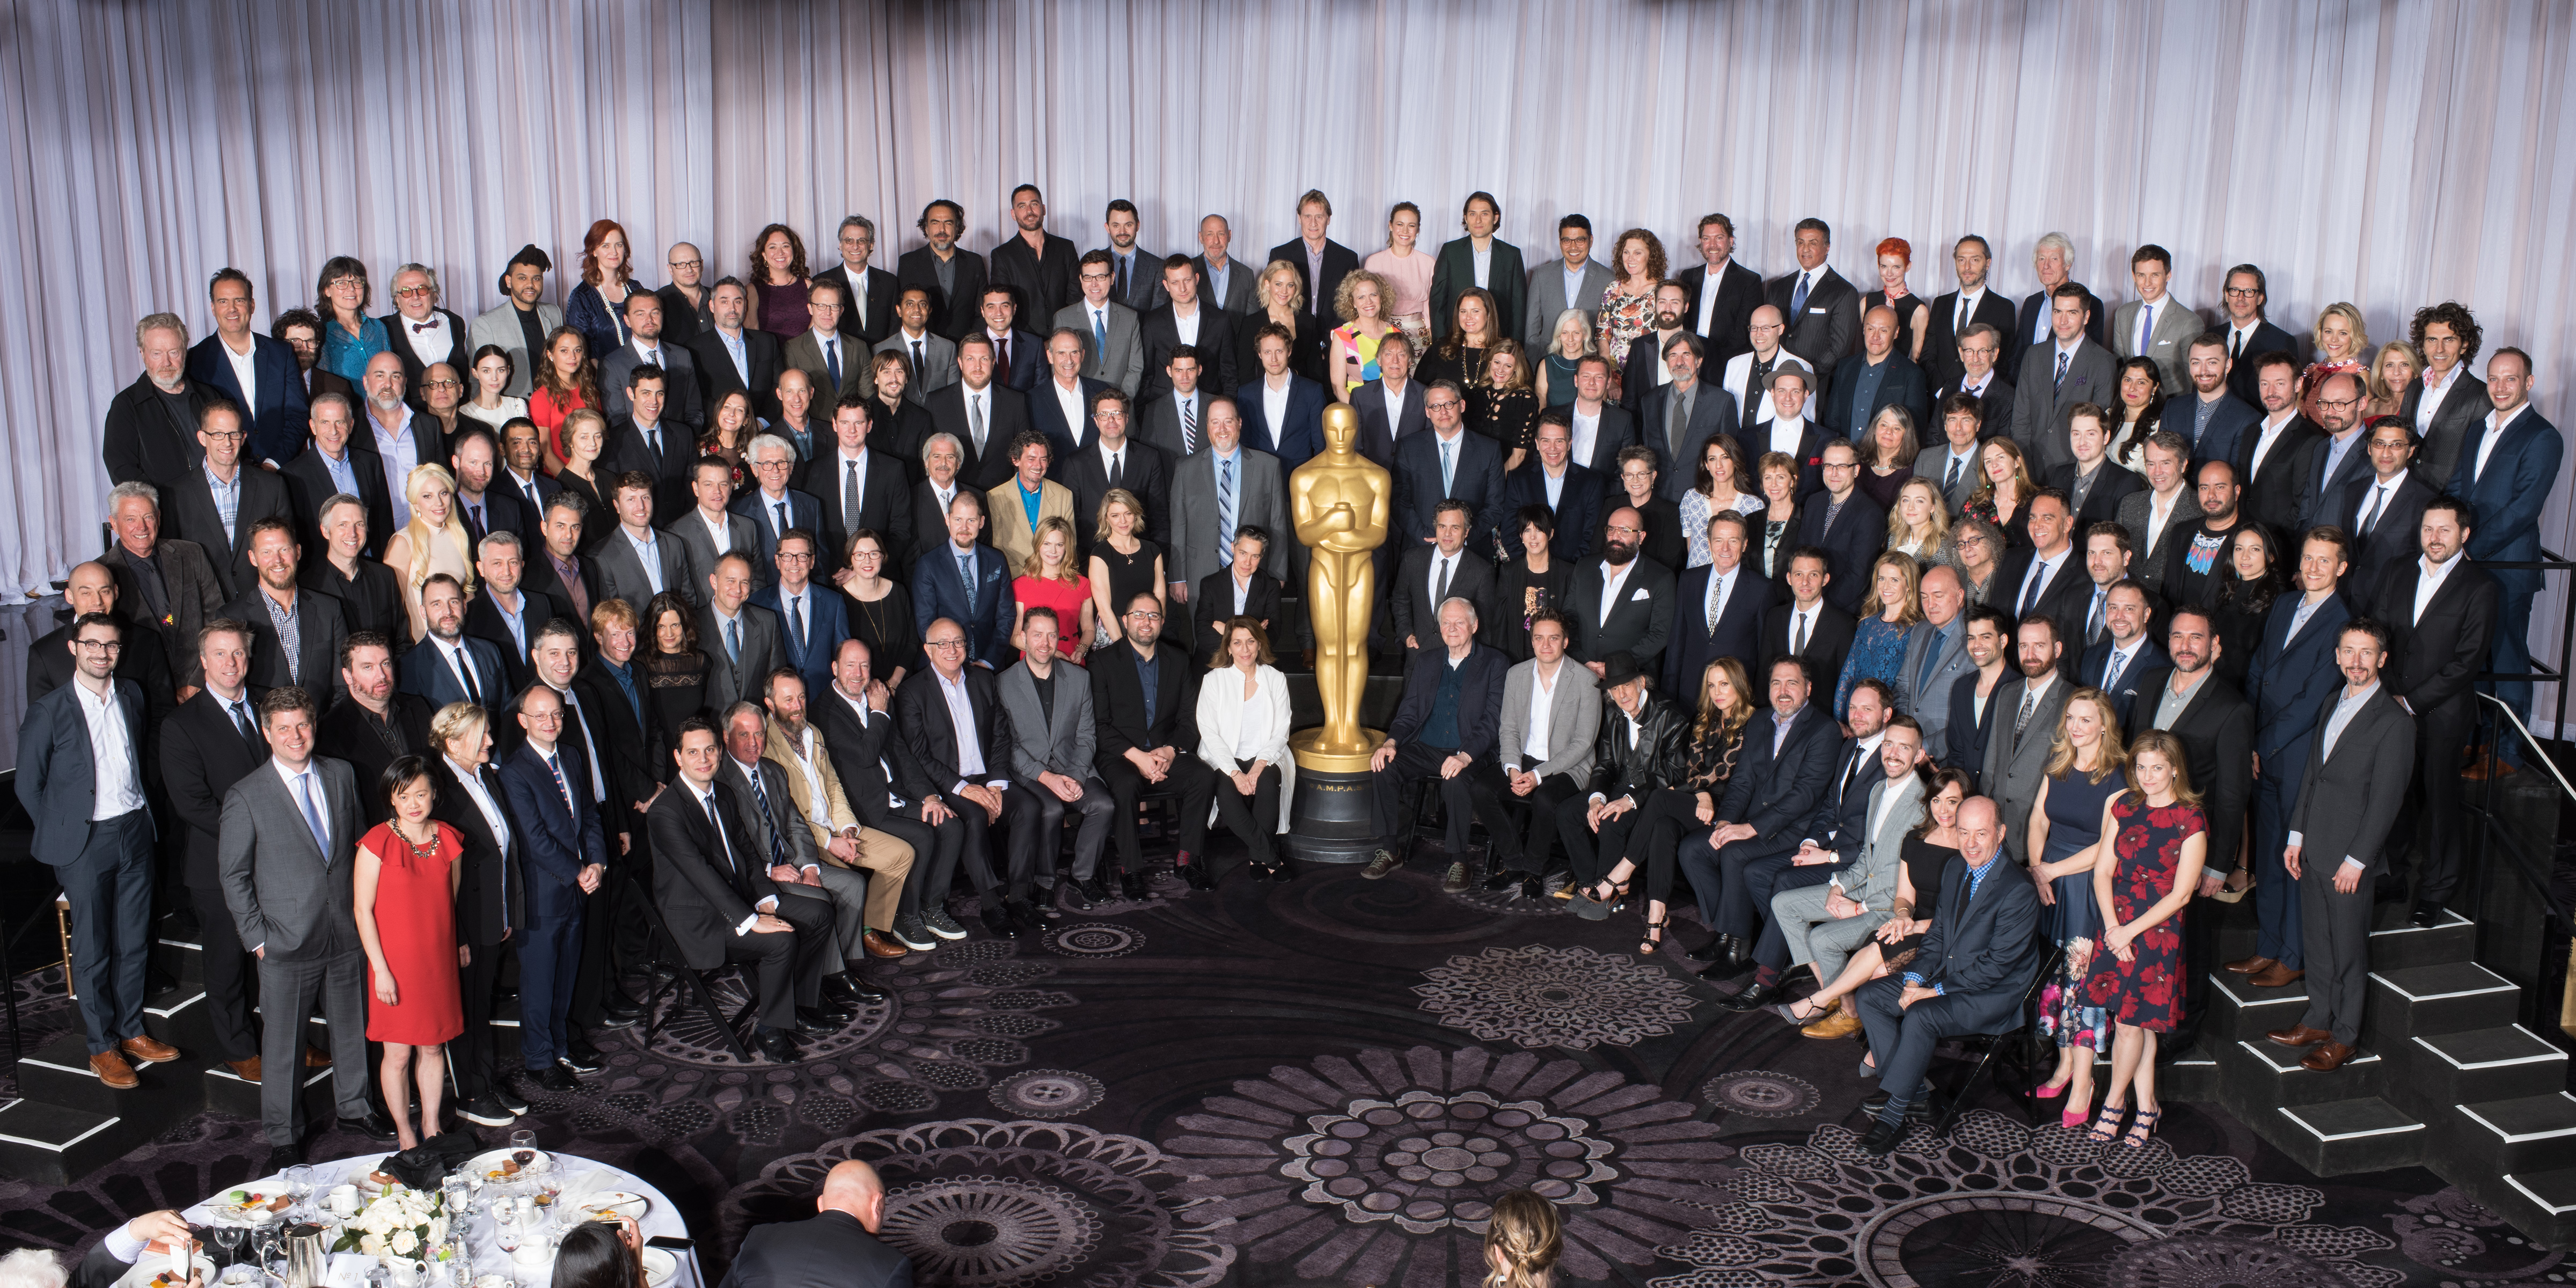 Nominees for the 88th Oscars¨ at the Nominees Luncheon at the Beverly Hilton, Monday, February 8, 2016. The 88th Oscars¨, hosted by Chris Rock, will air on Sunday, February 28, live on ABC.